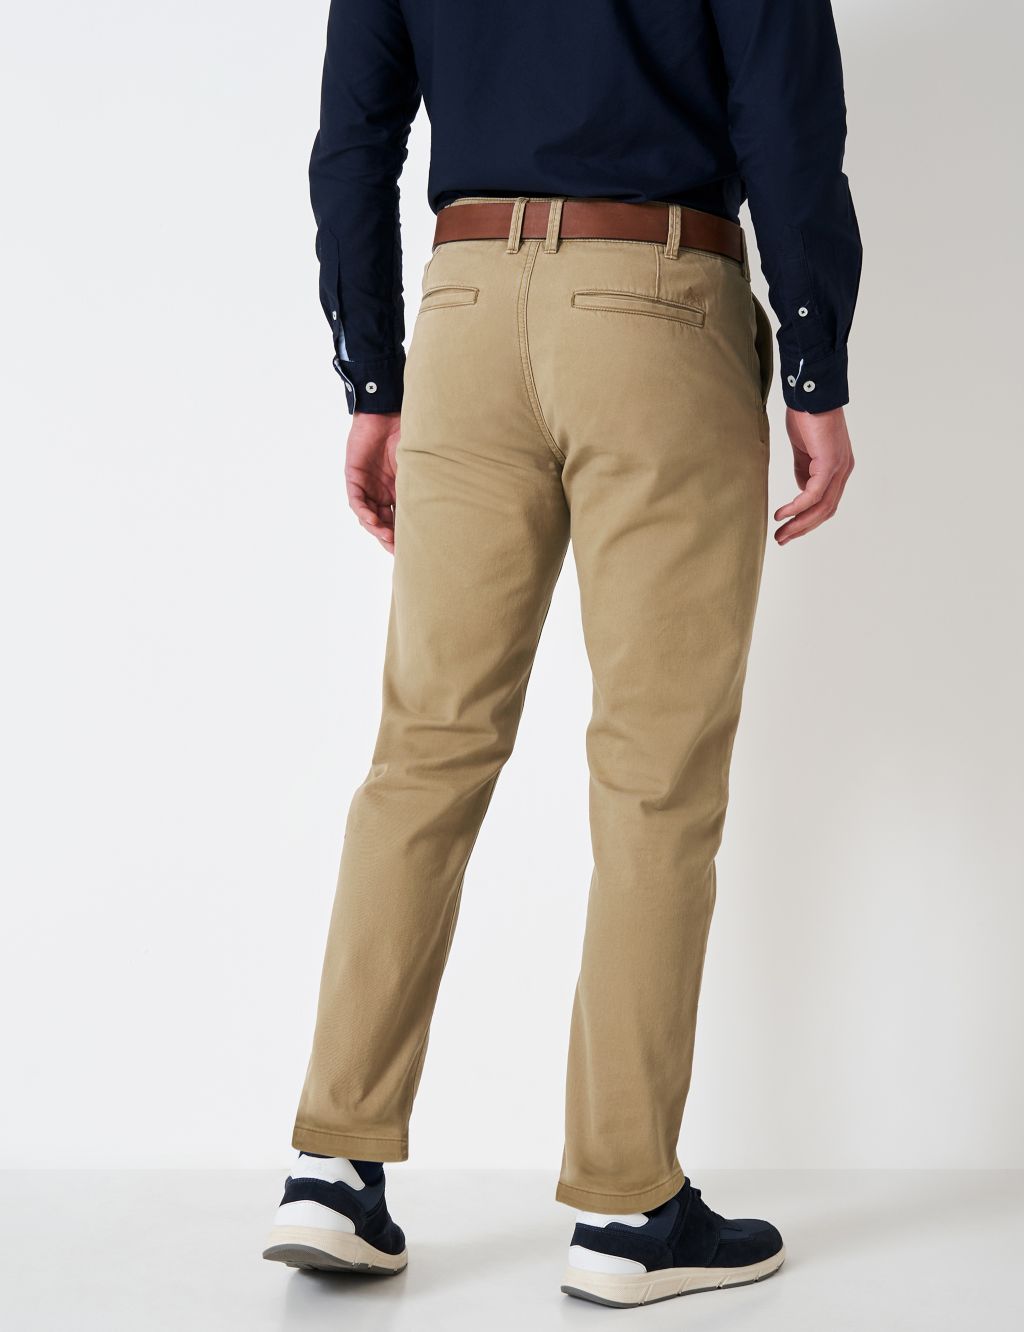 Straight Fit Pure Cotton Chinos image 3